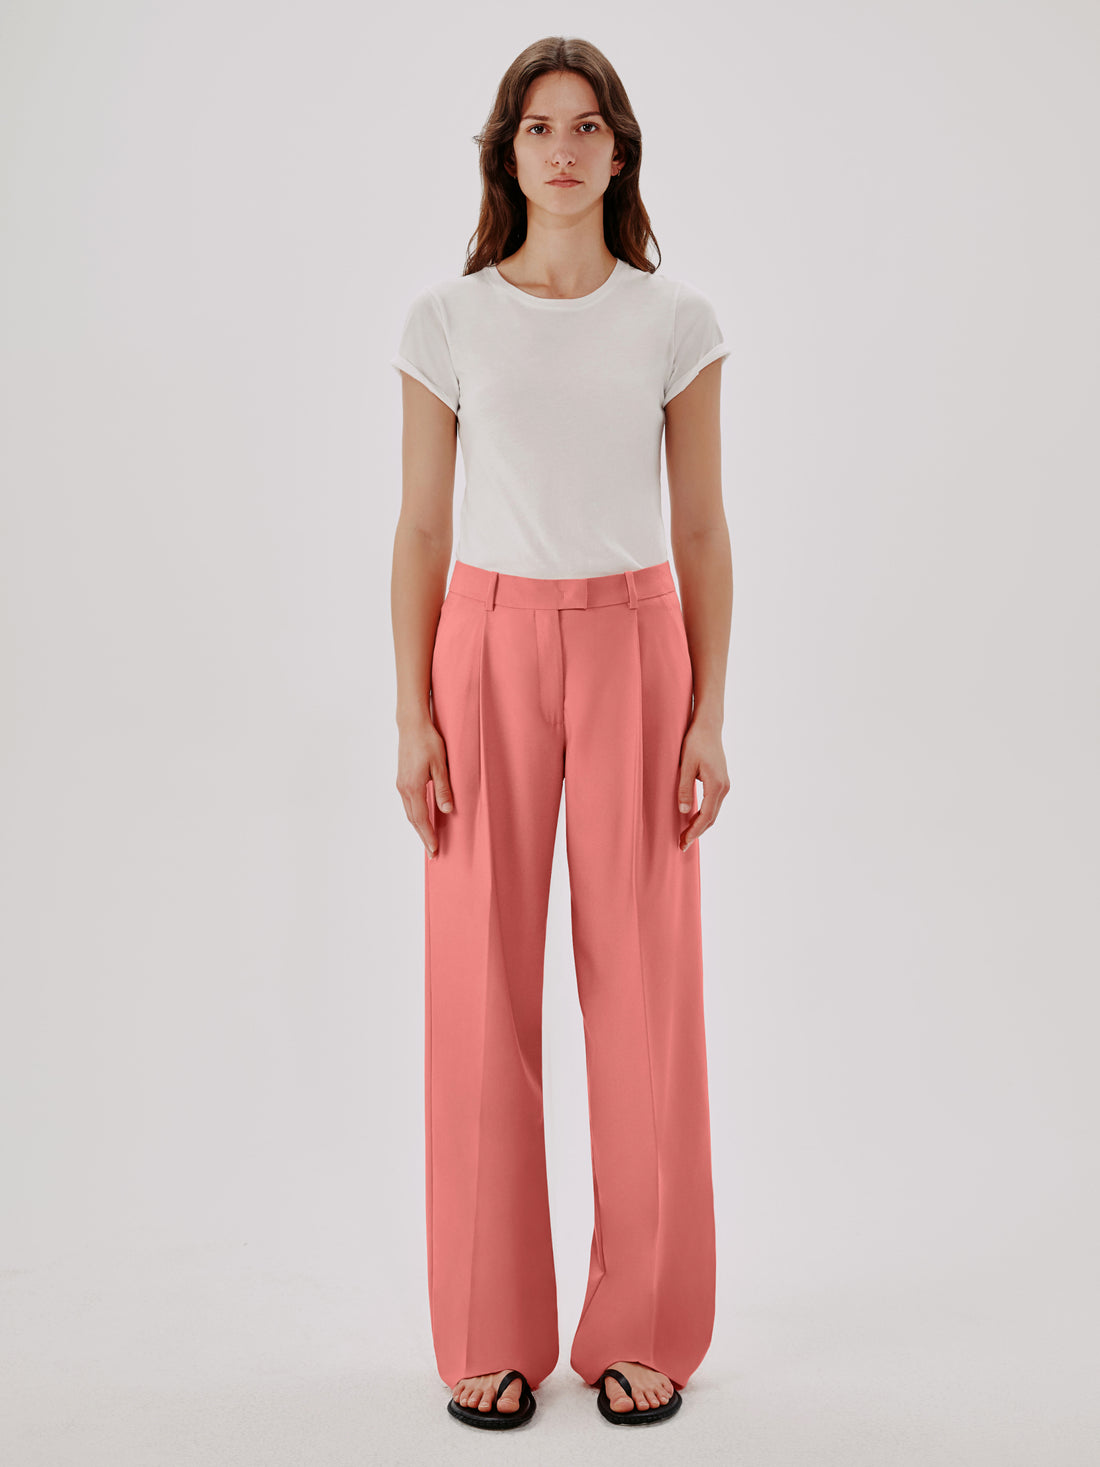 Product image40 with color pink